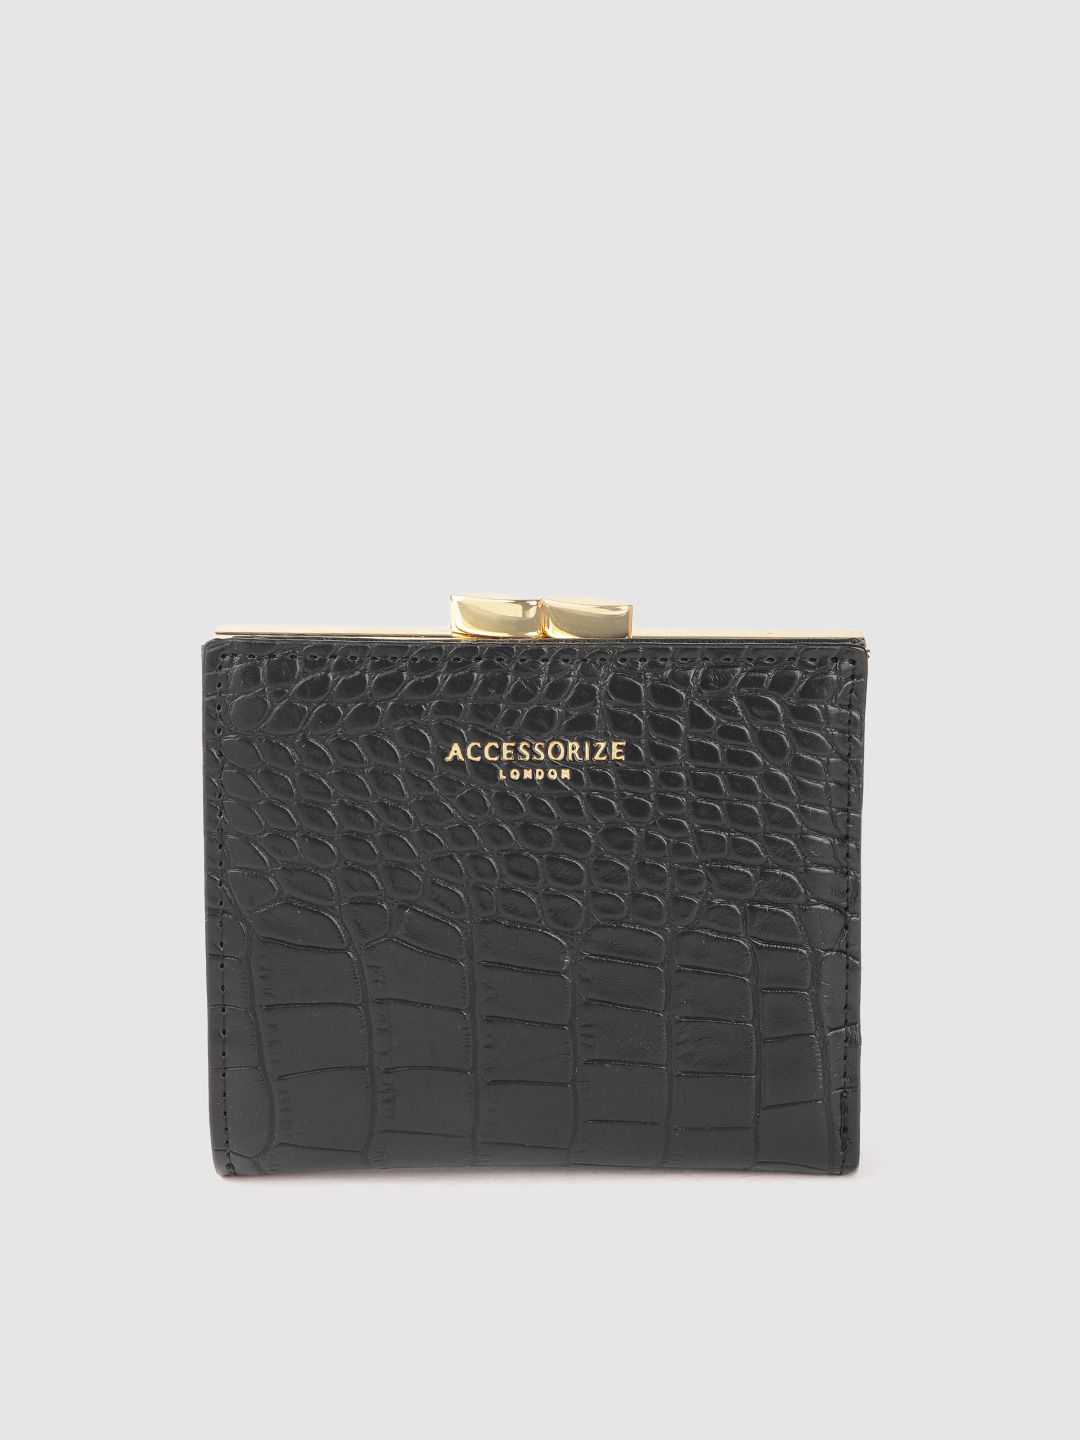 Accessorize Women Black Croc Textured Two Fold Wallet Price in India